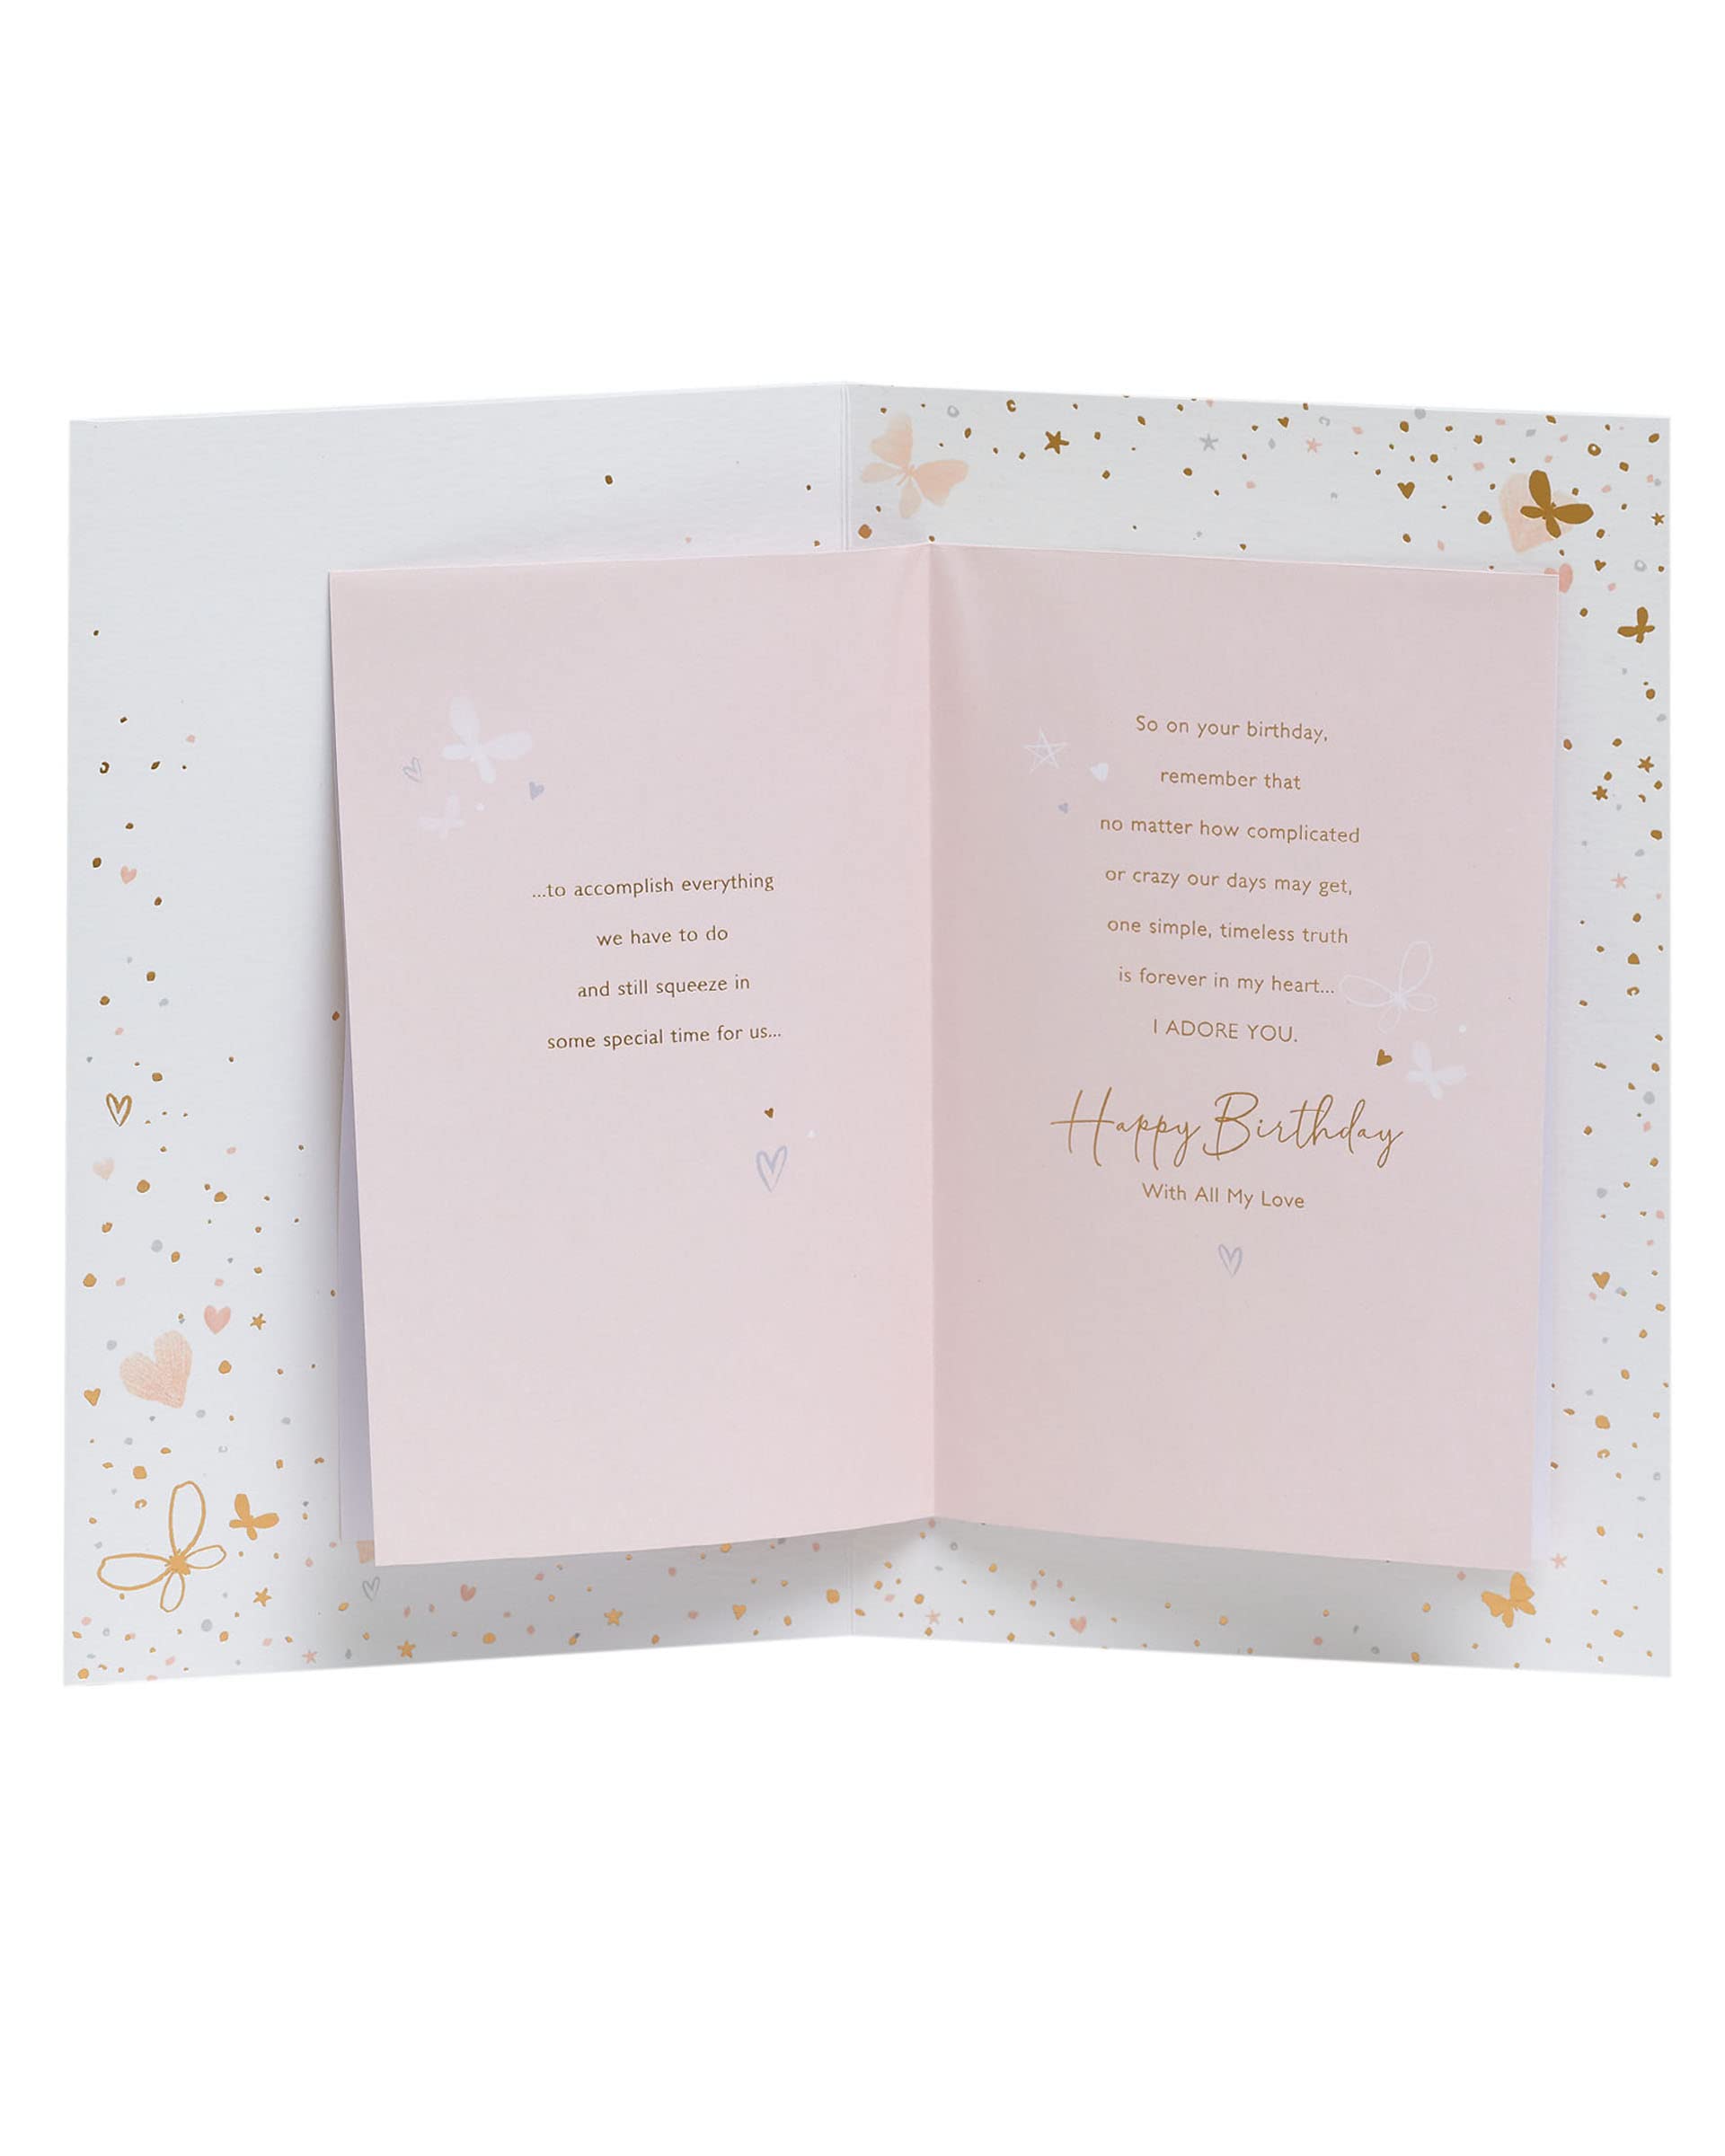 UK Greetings Wife Birthday Card With Envelope - Traditional Design with Sentimental Message